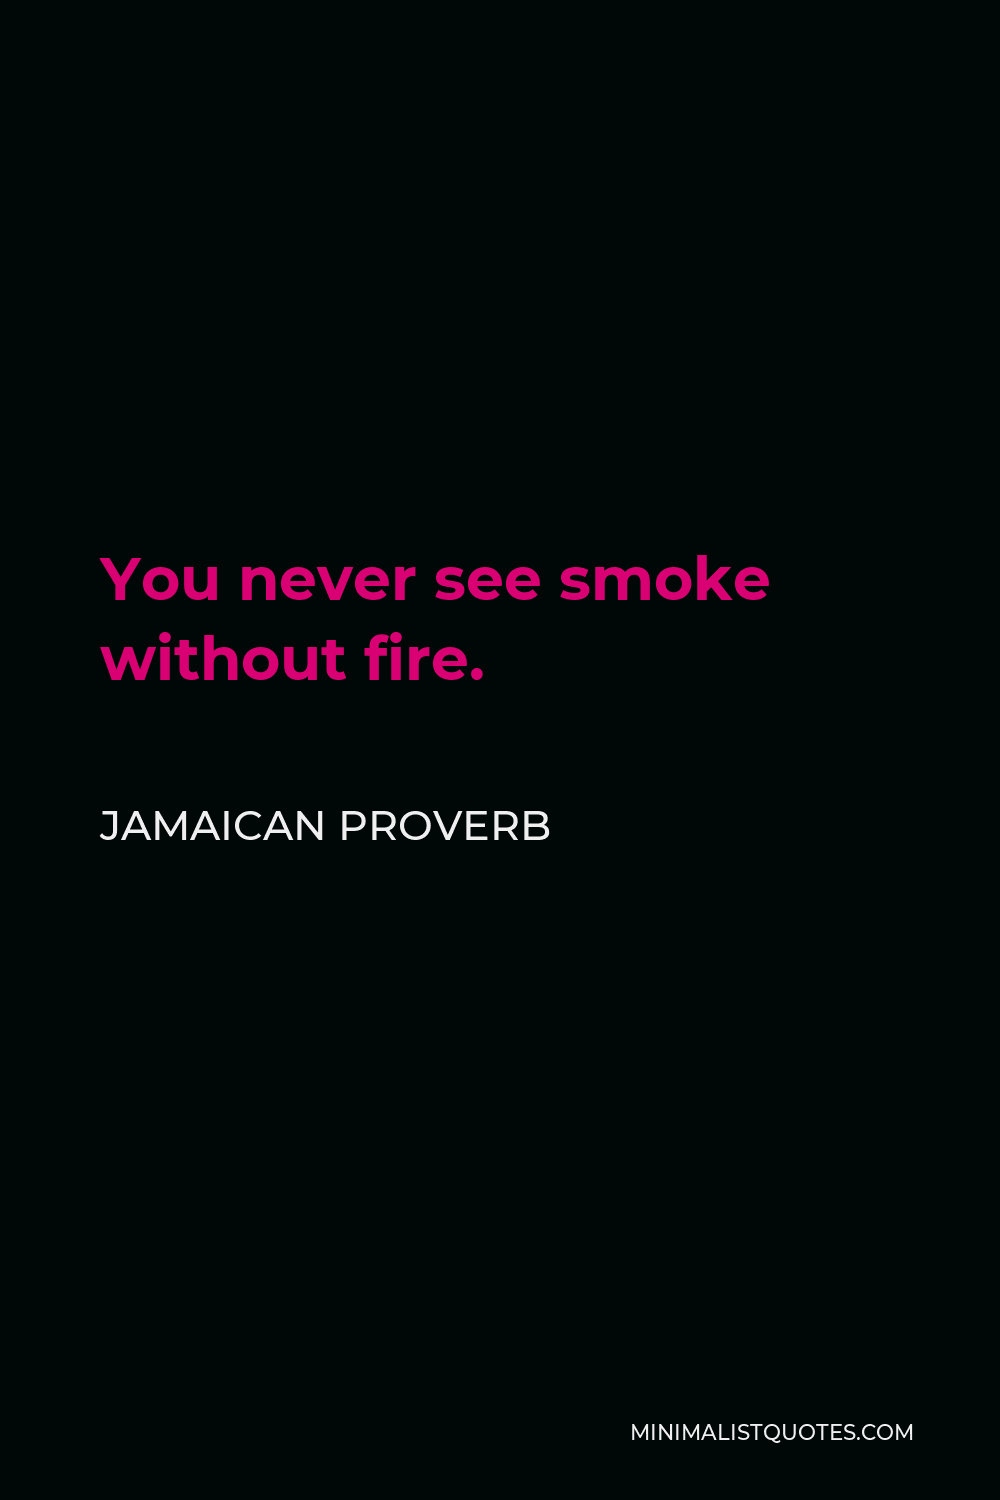 Jamaican Proverb Quote - You never see smoke without fire.